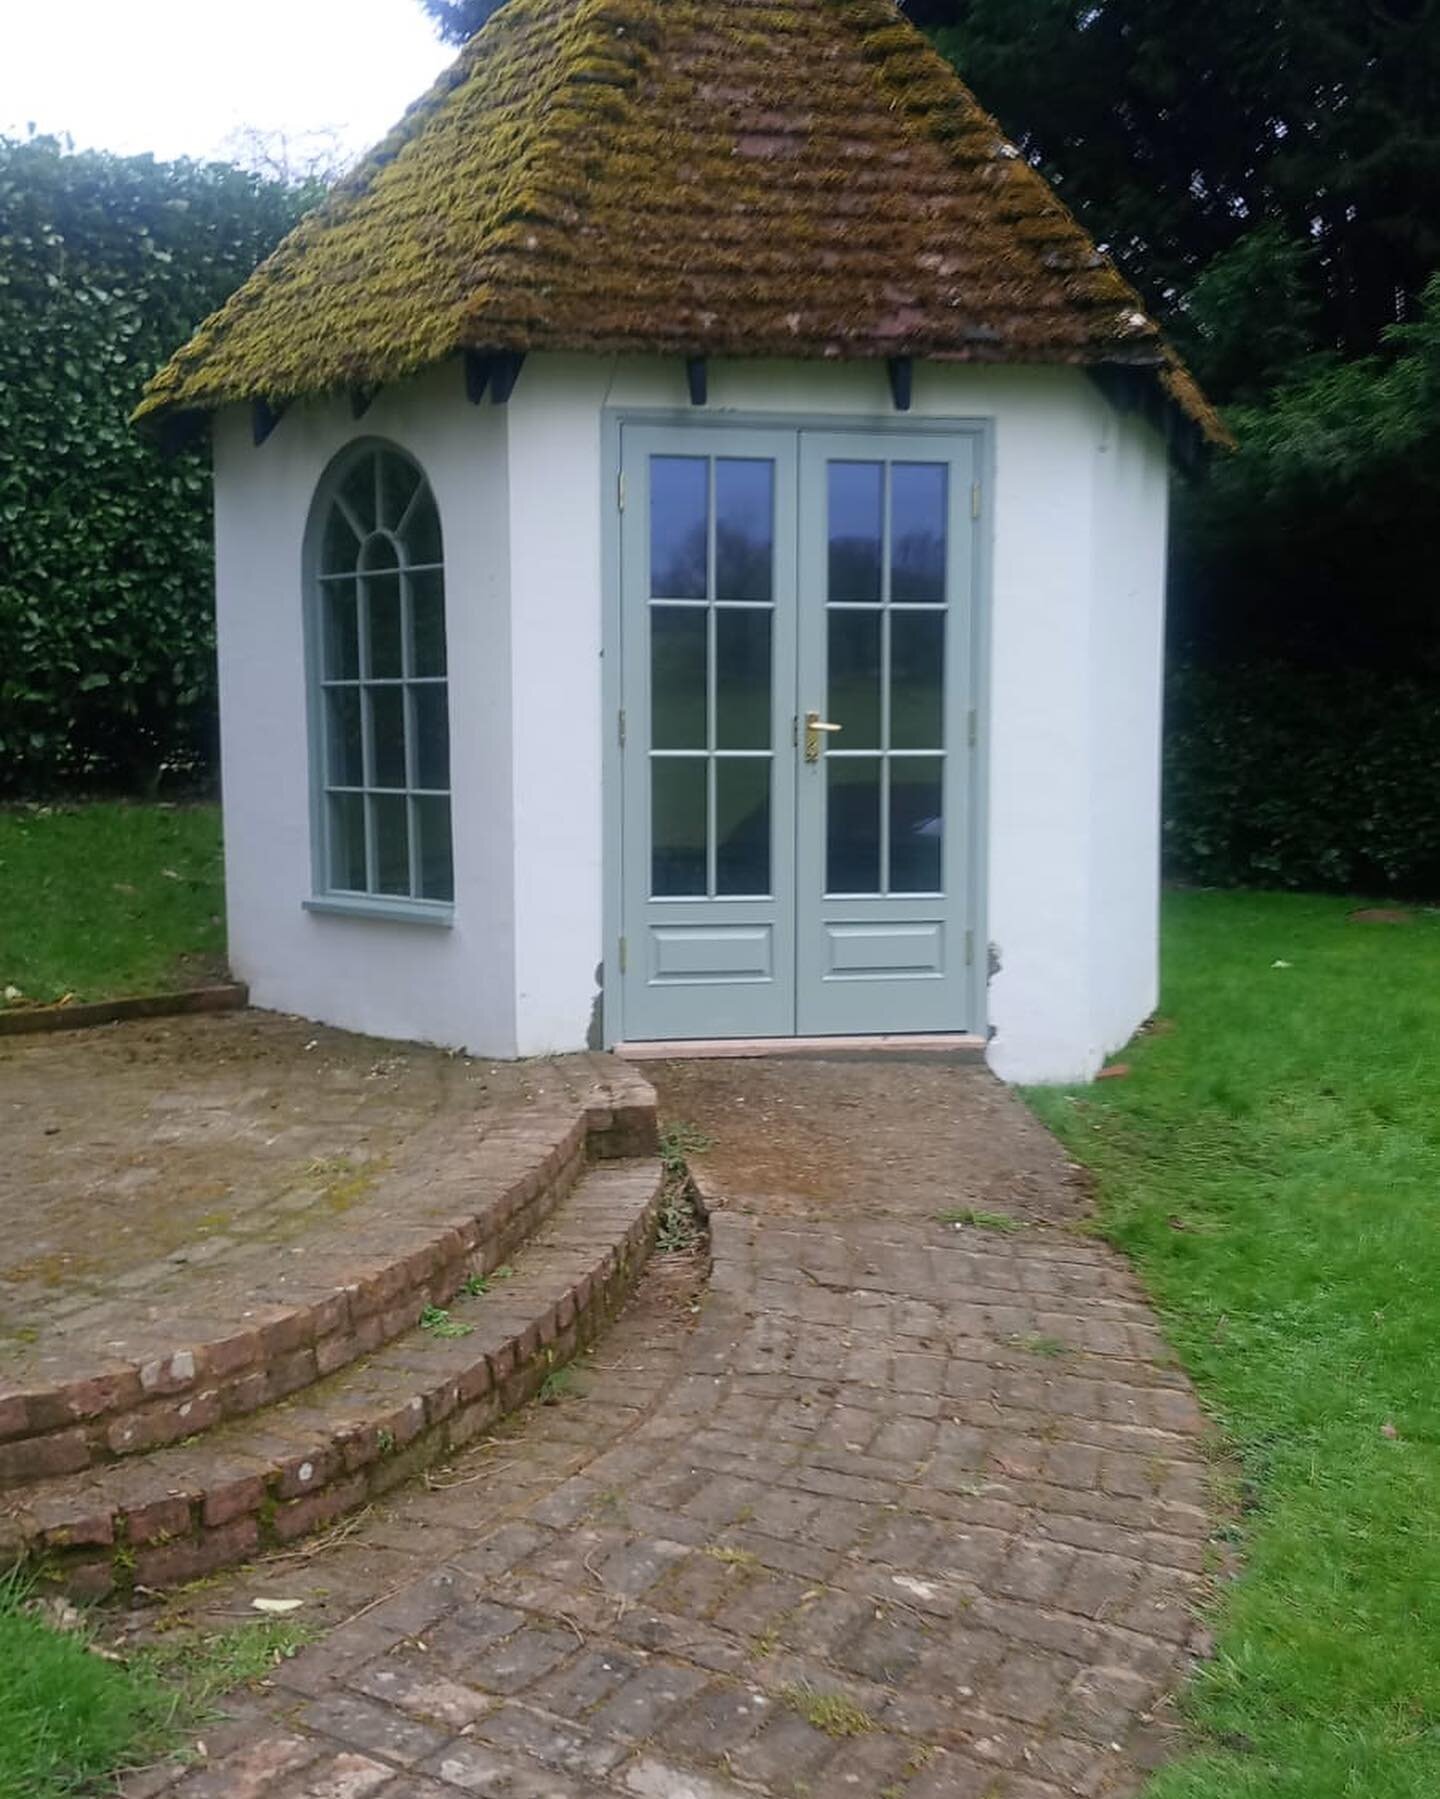 The prettiest of little summer houses in our Hampshire project&hellip; we had new doors and a window made, re rendered and painted in @farrowandball Pigeon and School house white to match the rest of the house. 
The roof was so pretty we kept it as i